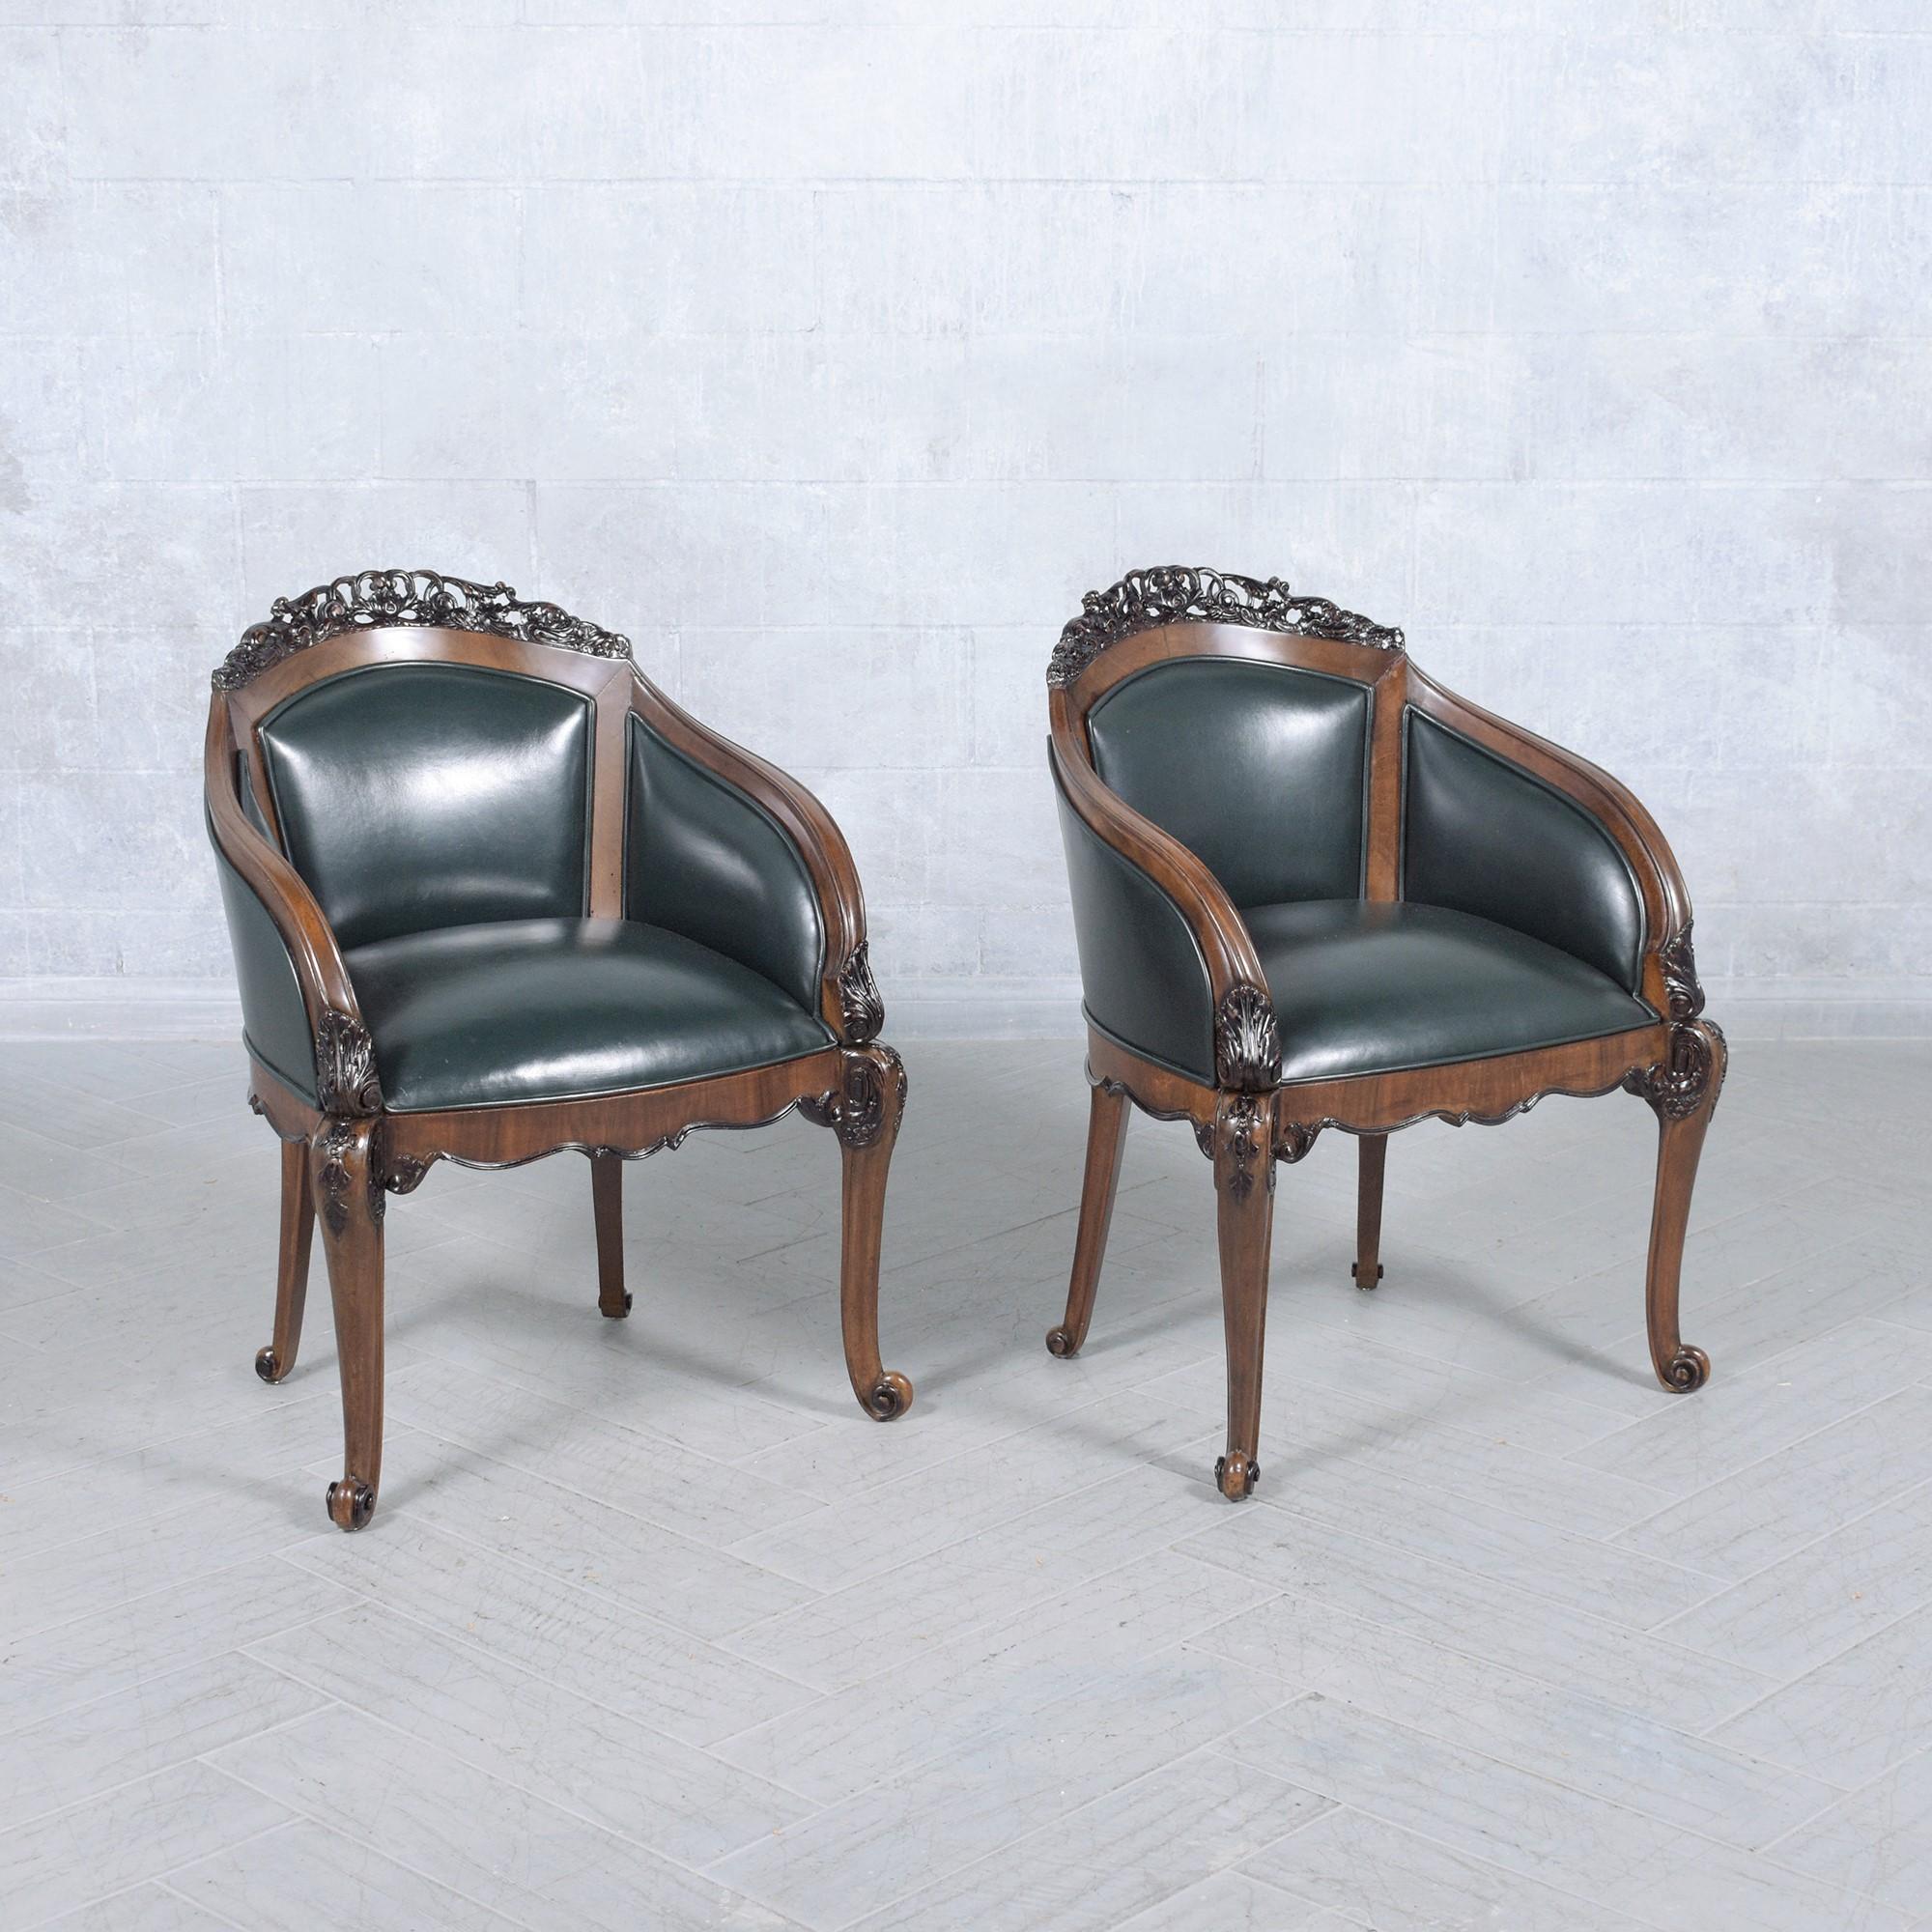 19th-Century English Chinoiserie Bergères: Restored Elegance in Green Leather For Sale 3